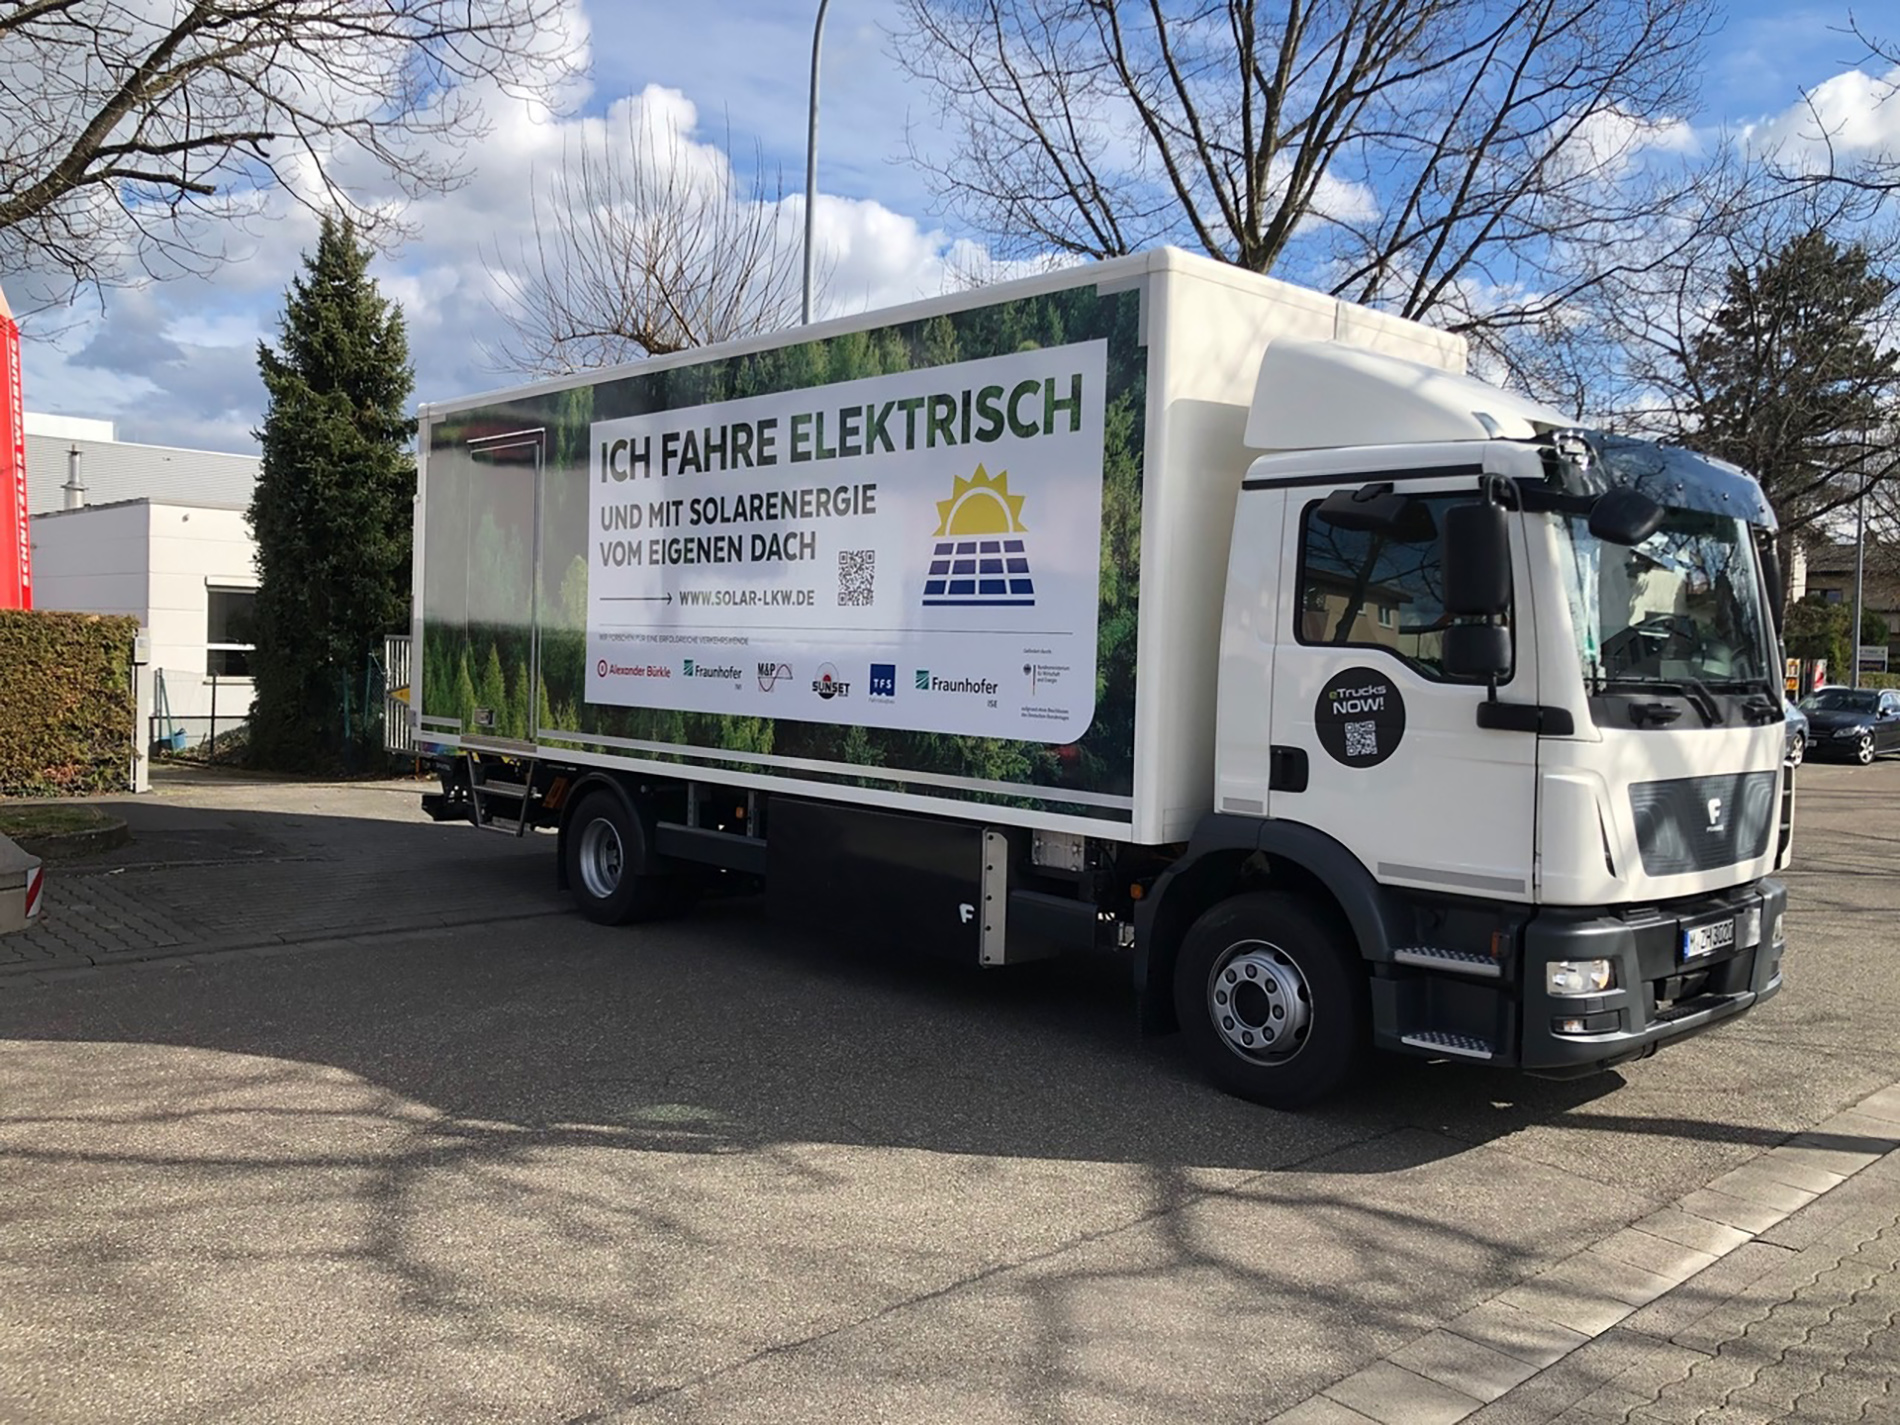 Electrical trucks and other commercial vehicles can save energy with solar energy. 